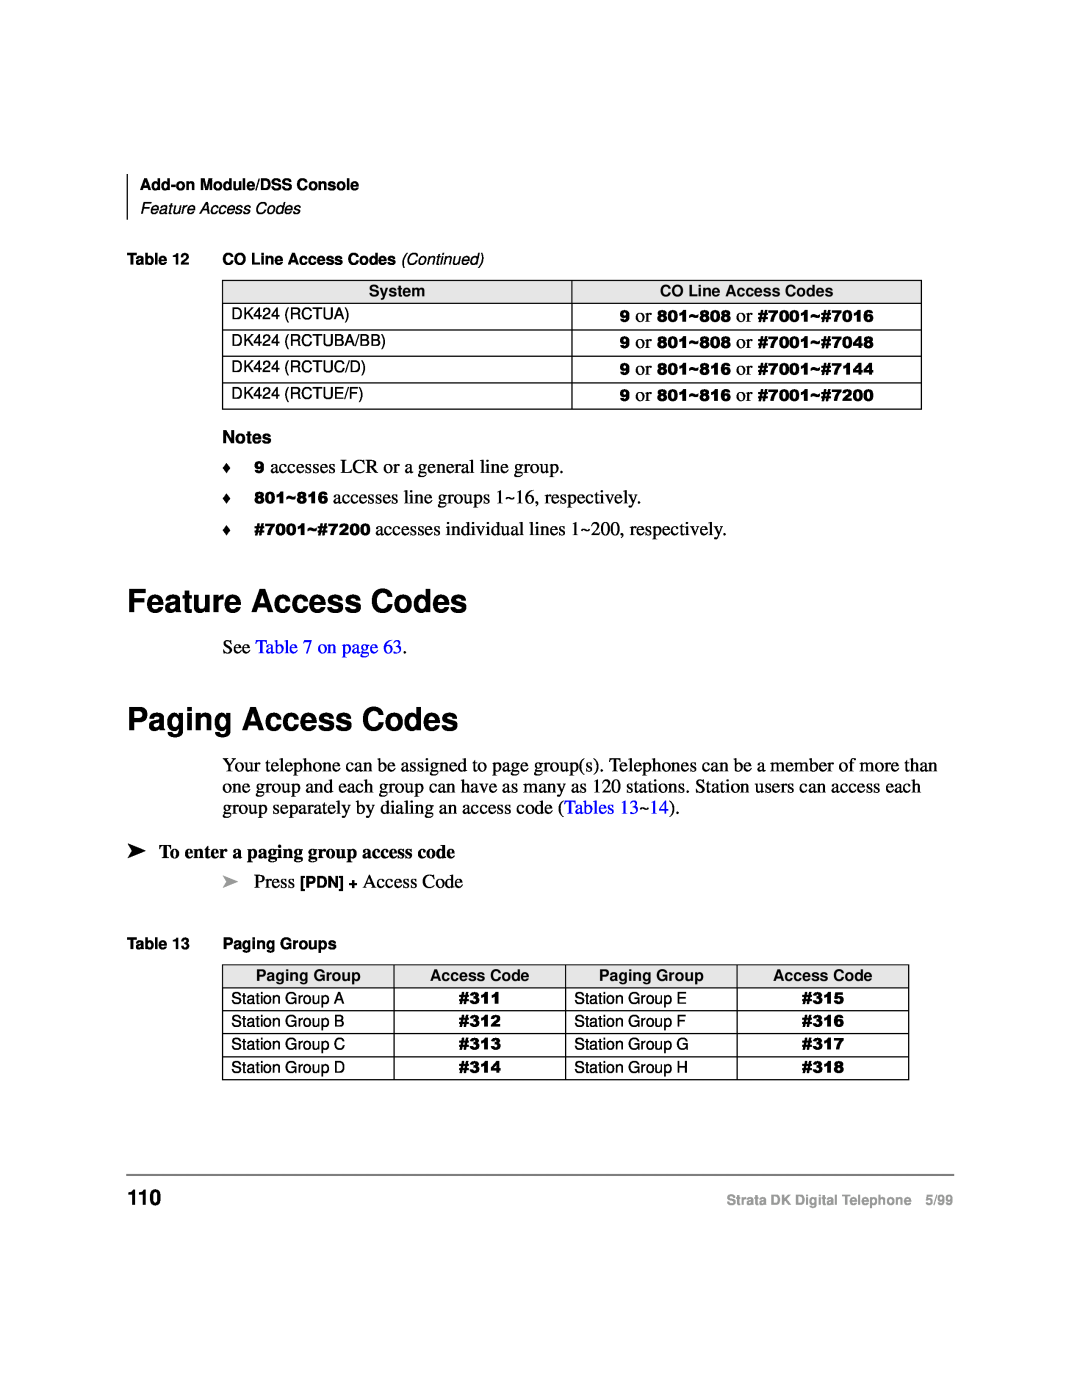 Toshiba CT manual Feature Access Codes, Paging Access Codes, To enter a paging group access code 